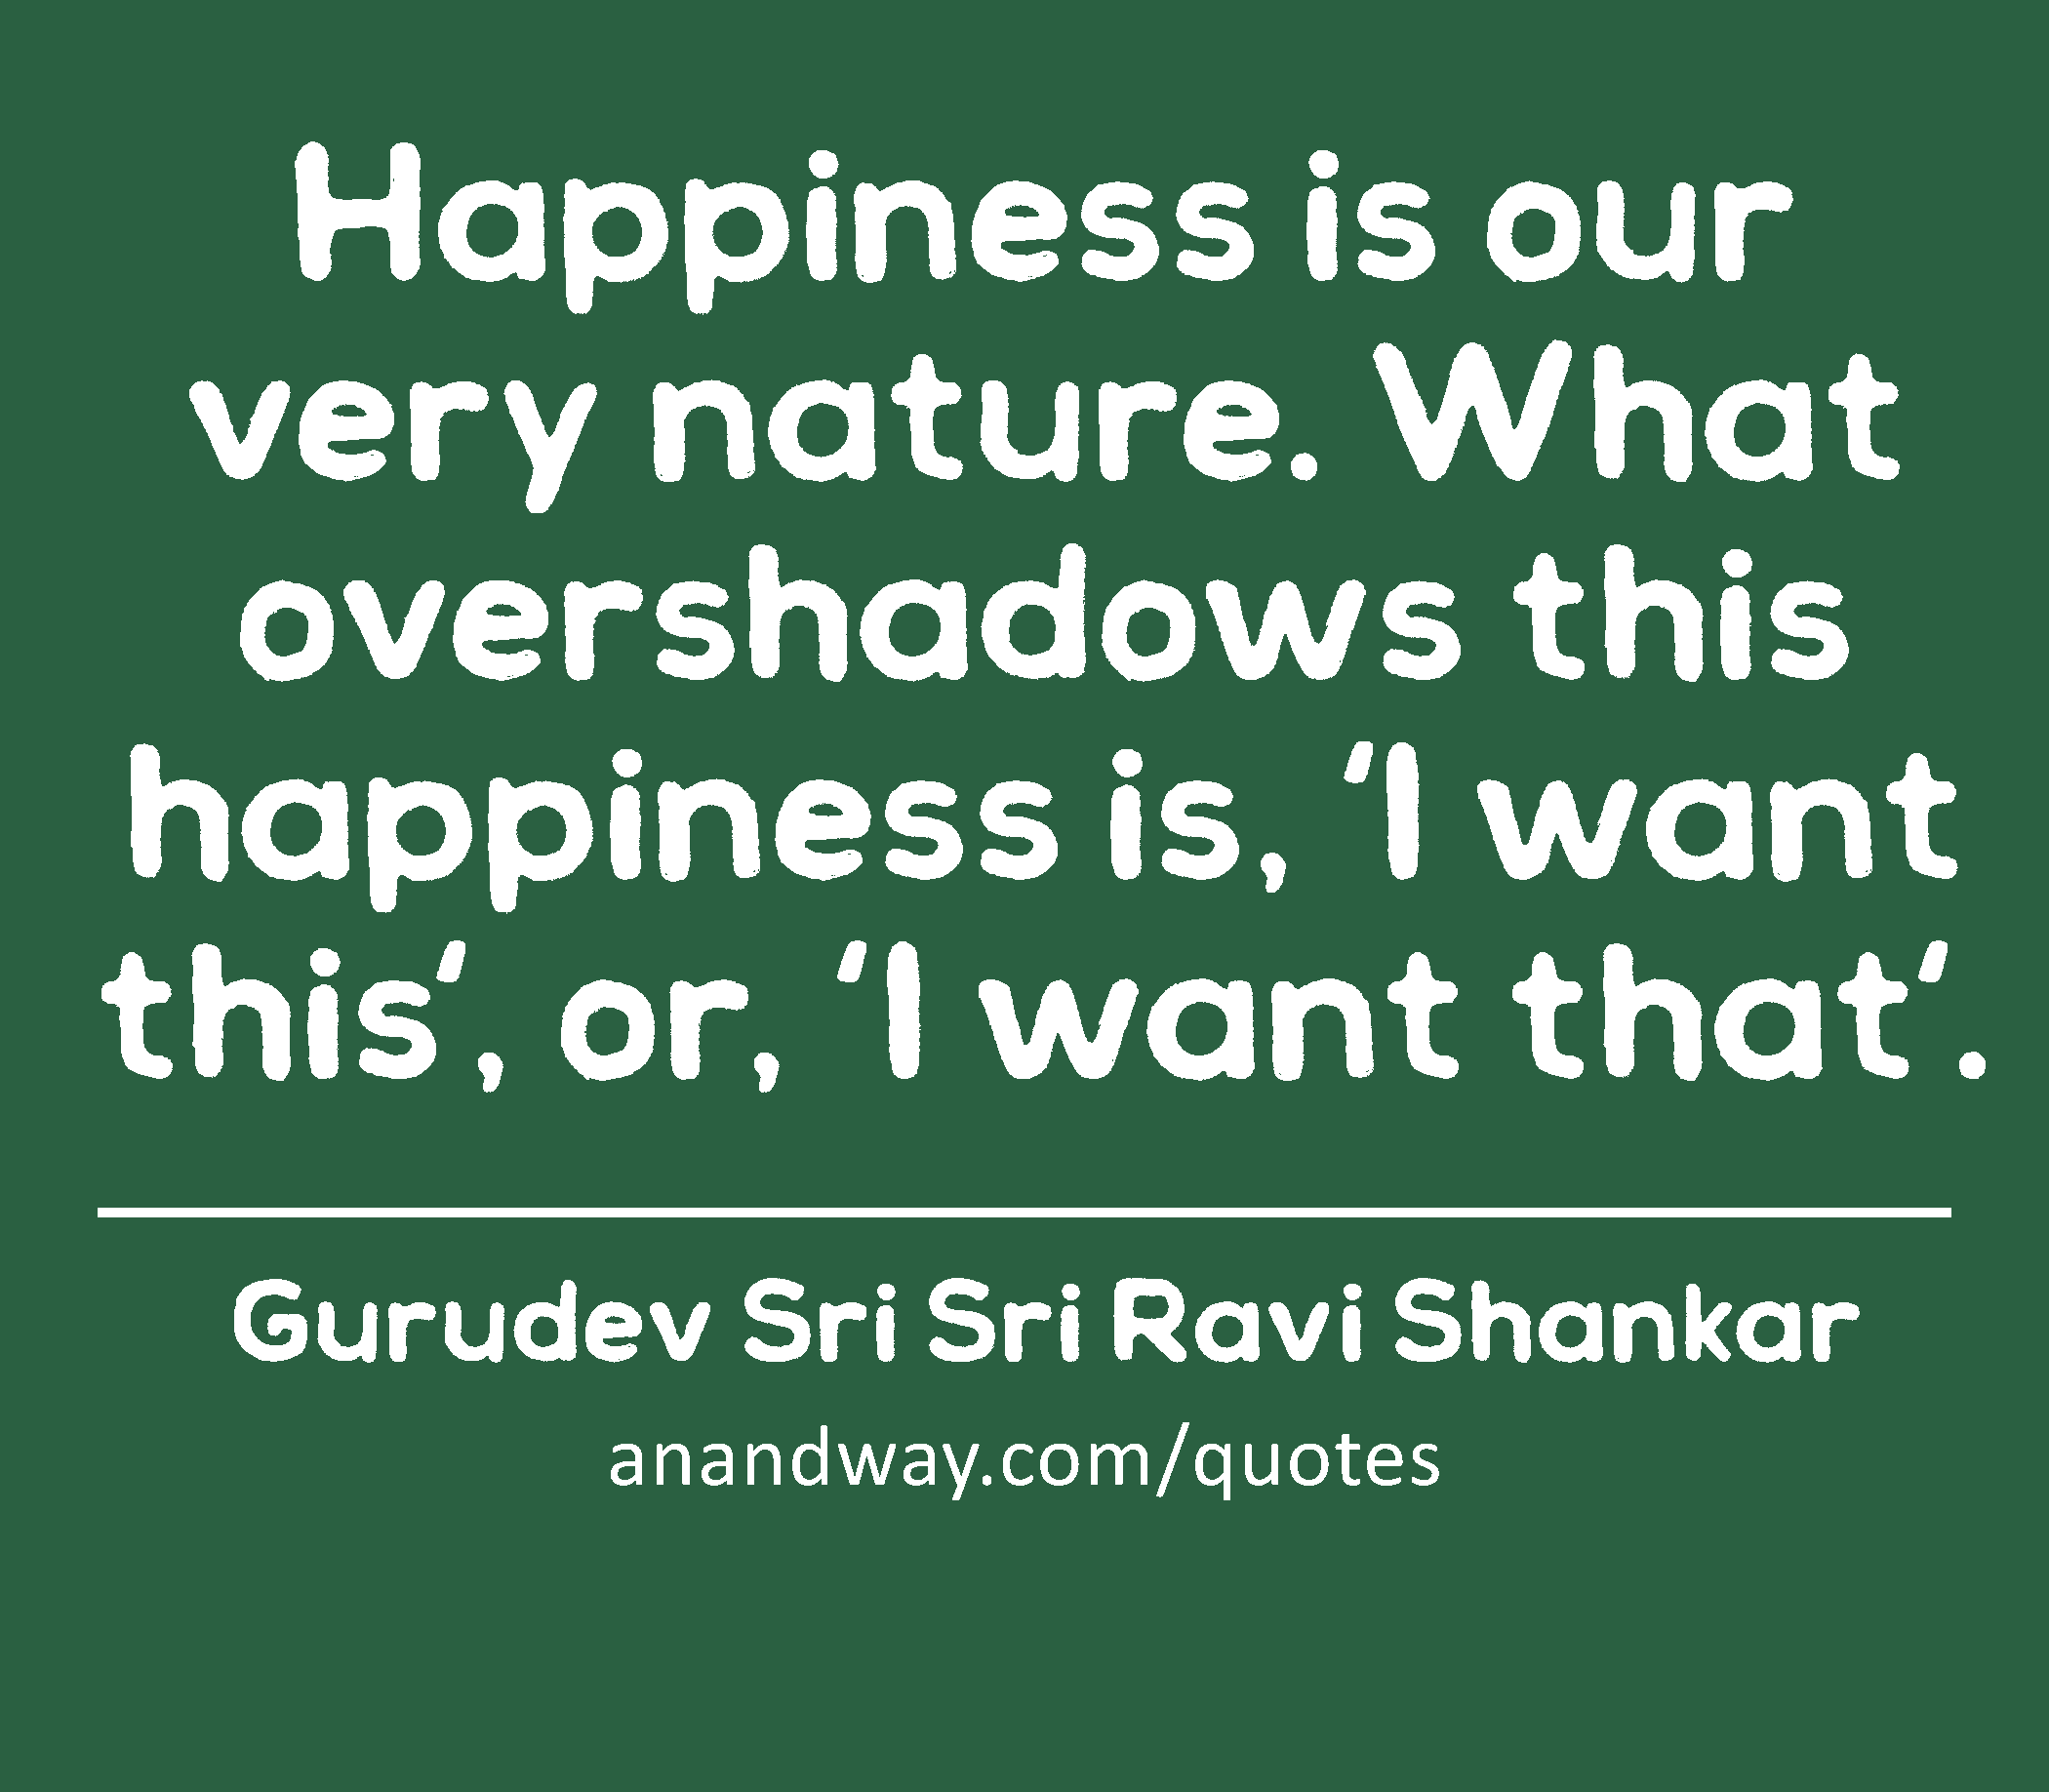 Happiness is our very nature. What overshadows this happiness is, ‘I want this', or, 'I want that'.
 -Gurudev Sri Sri Ravi Shankar